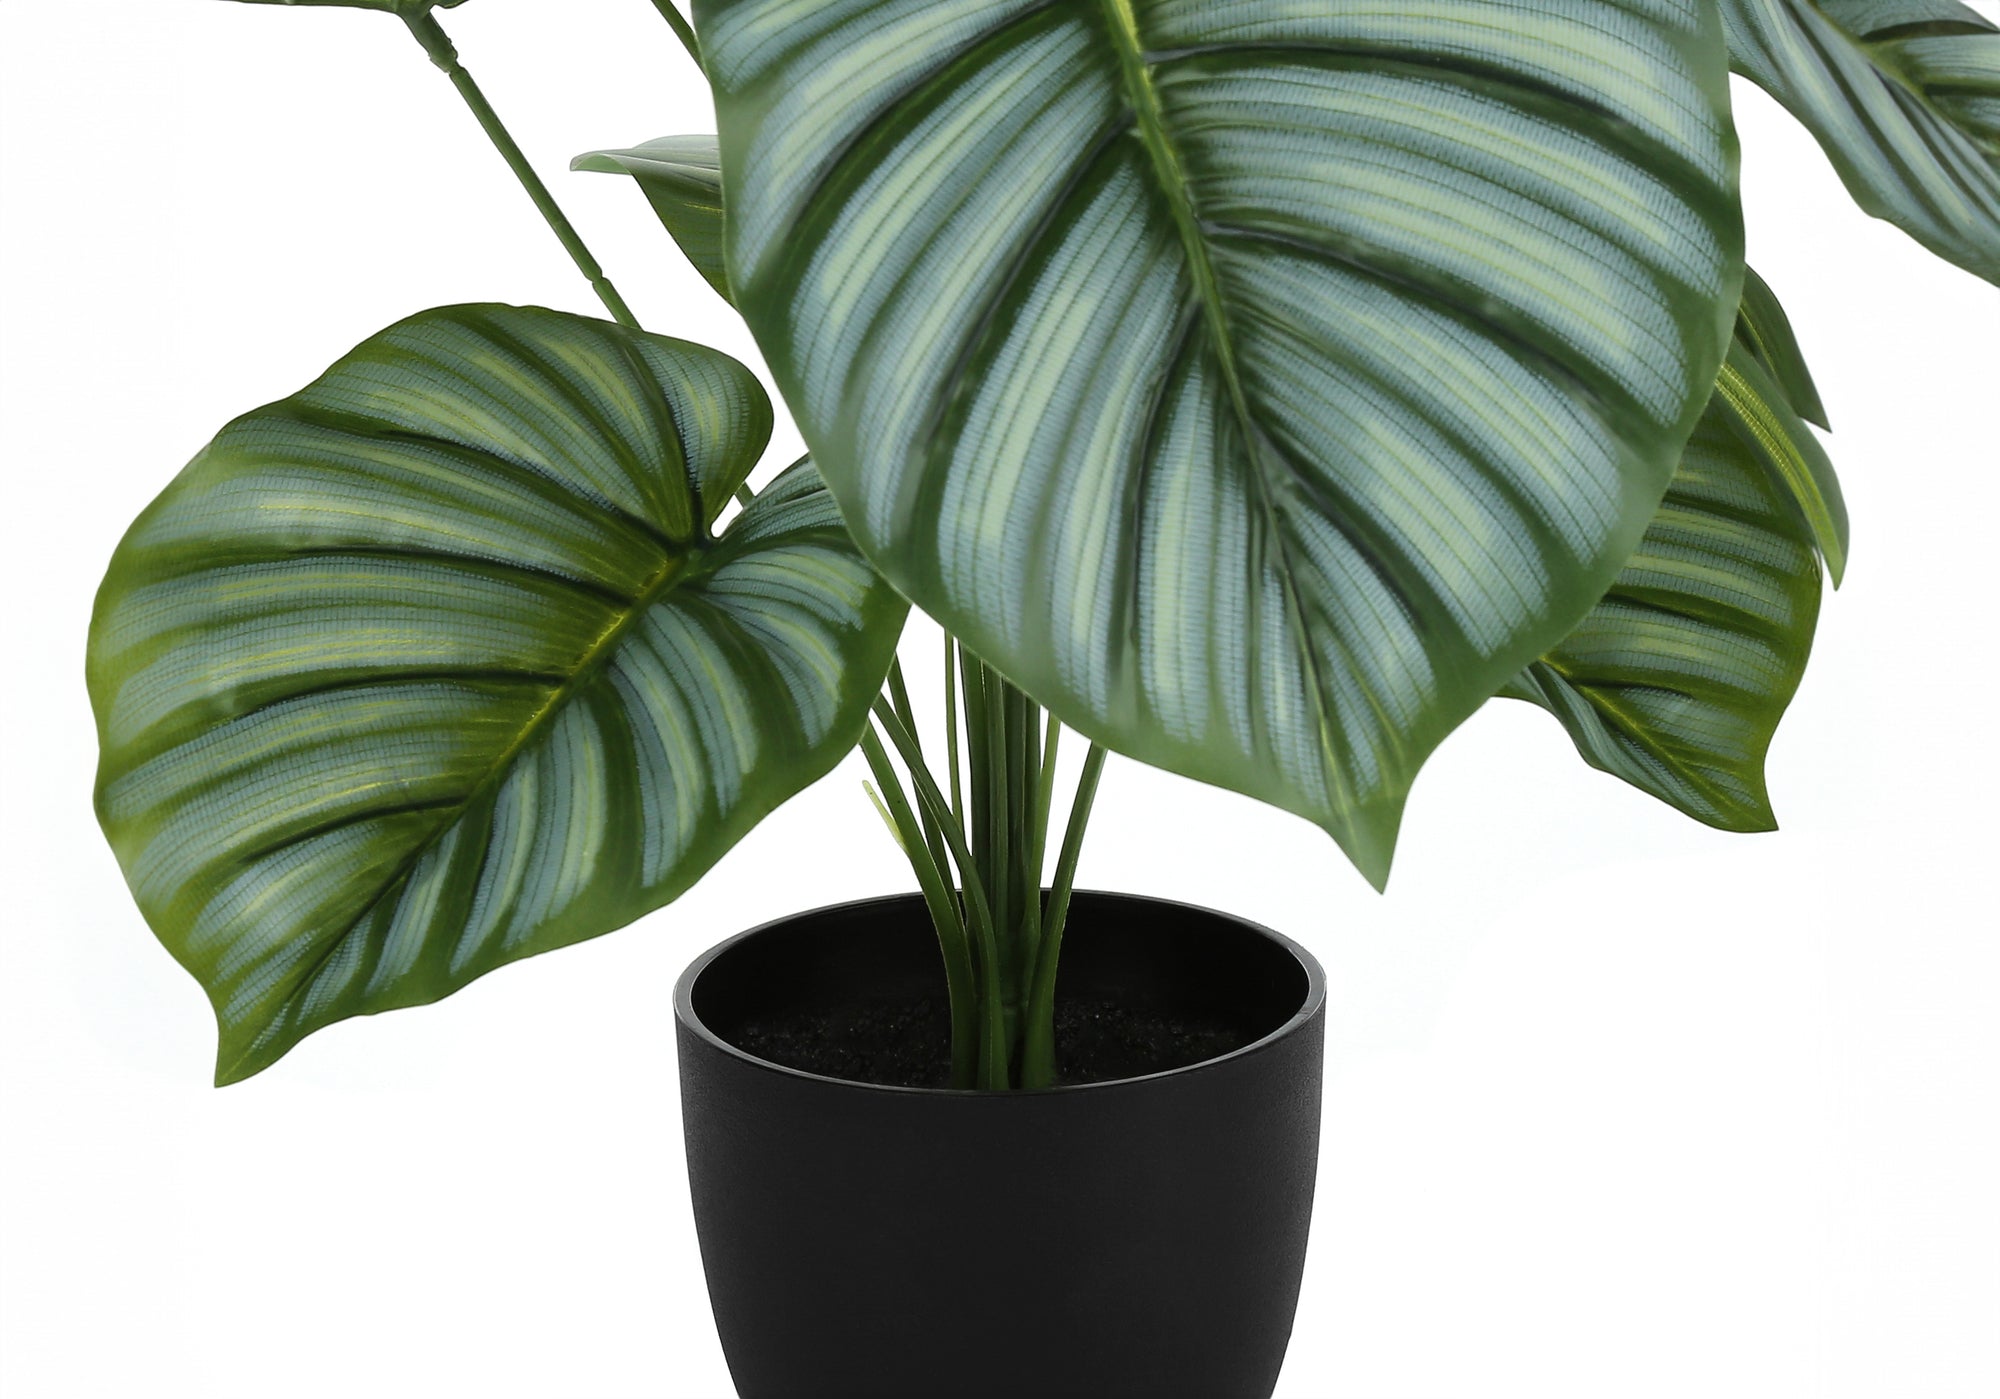 MN-689577    Artificial Plant, 24" Tall, Calathea, Indoor, Faux, Fake, Table, Greenery, Potted, Real Touch, Decorative, Green Leaves, Black Pot